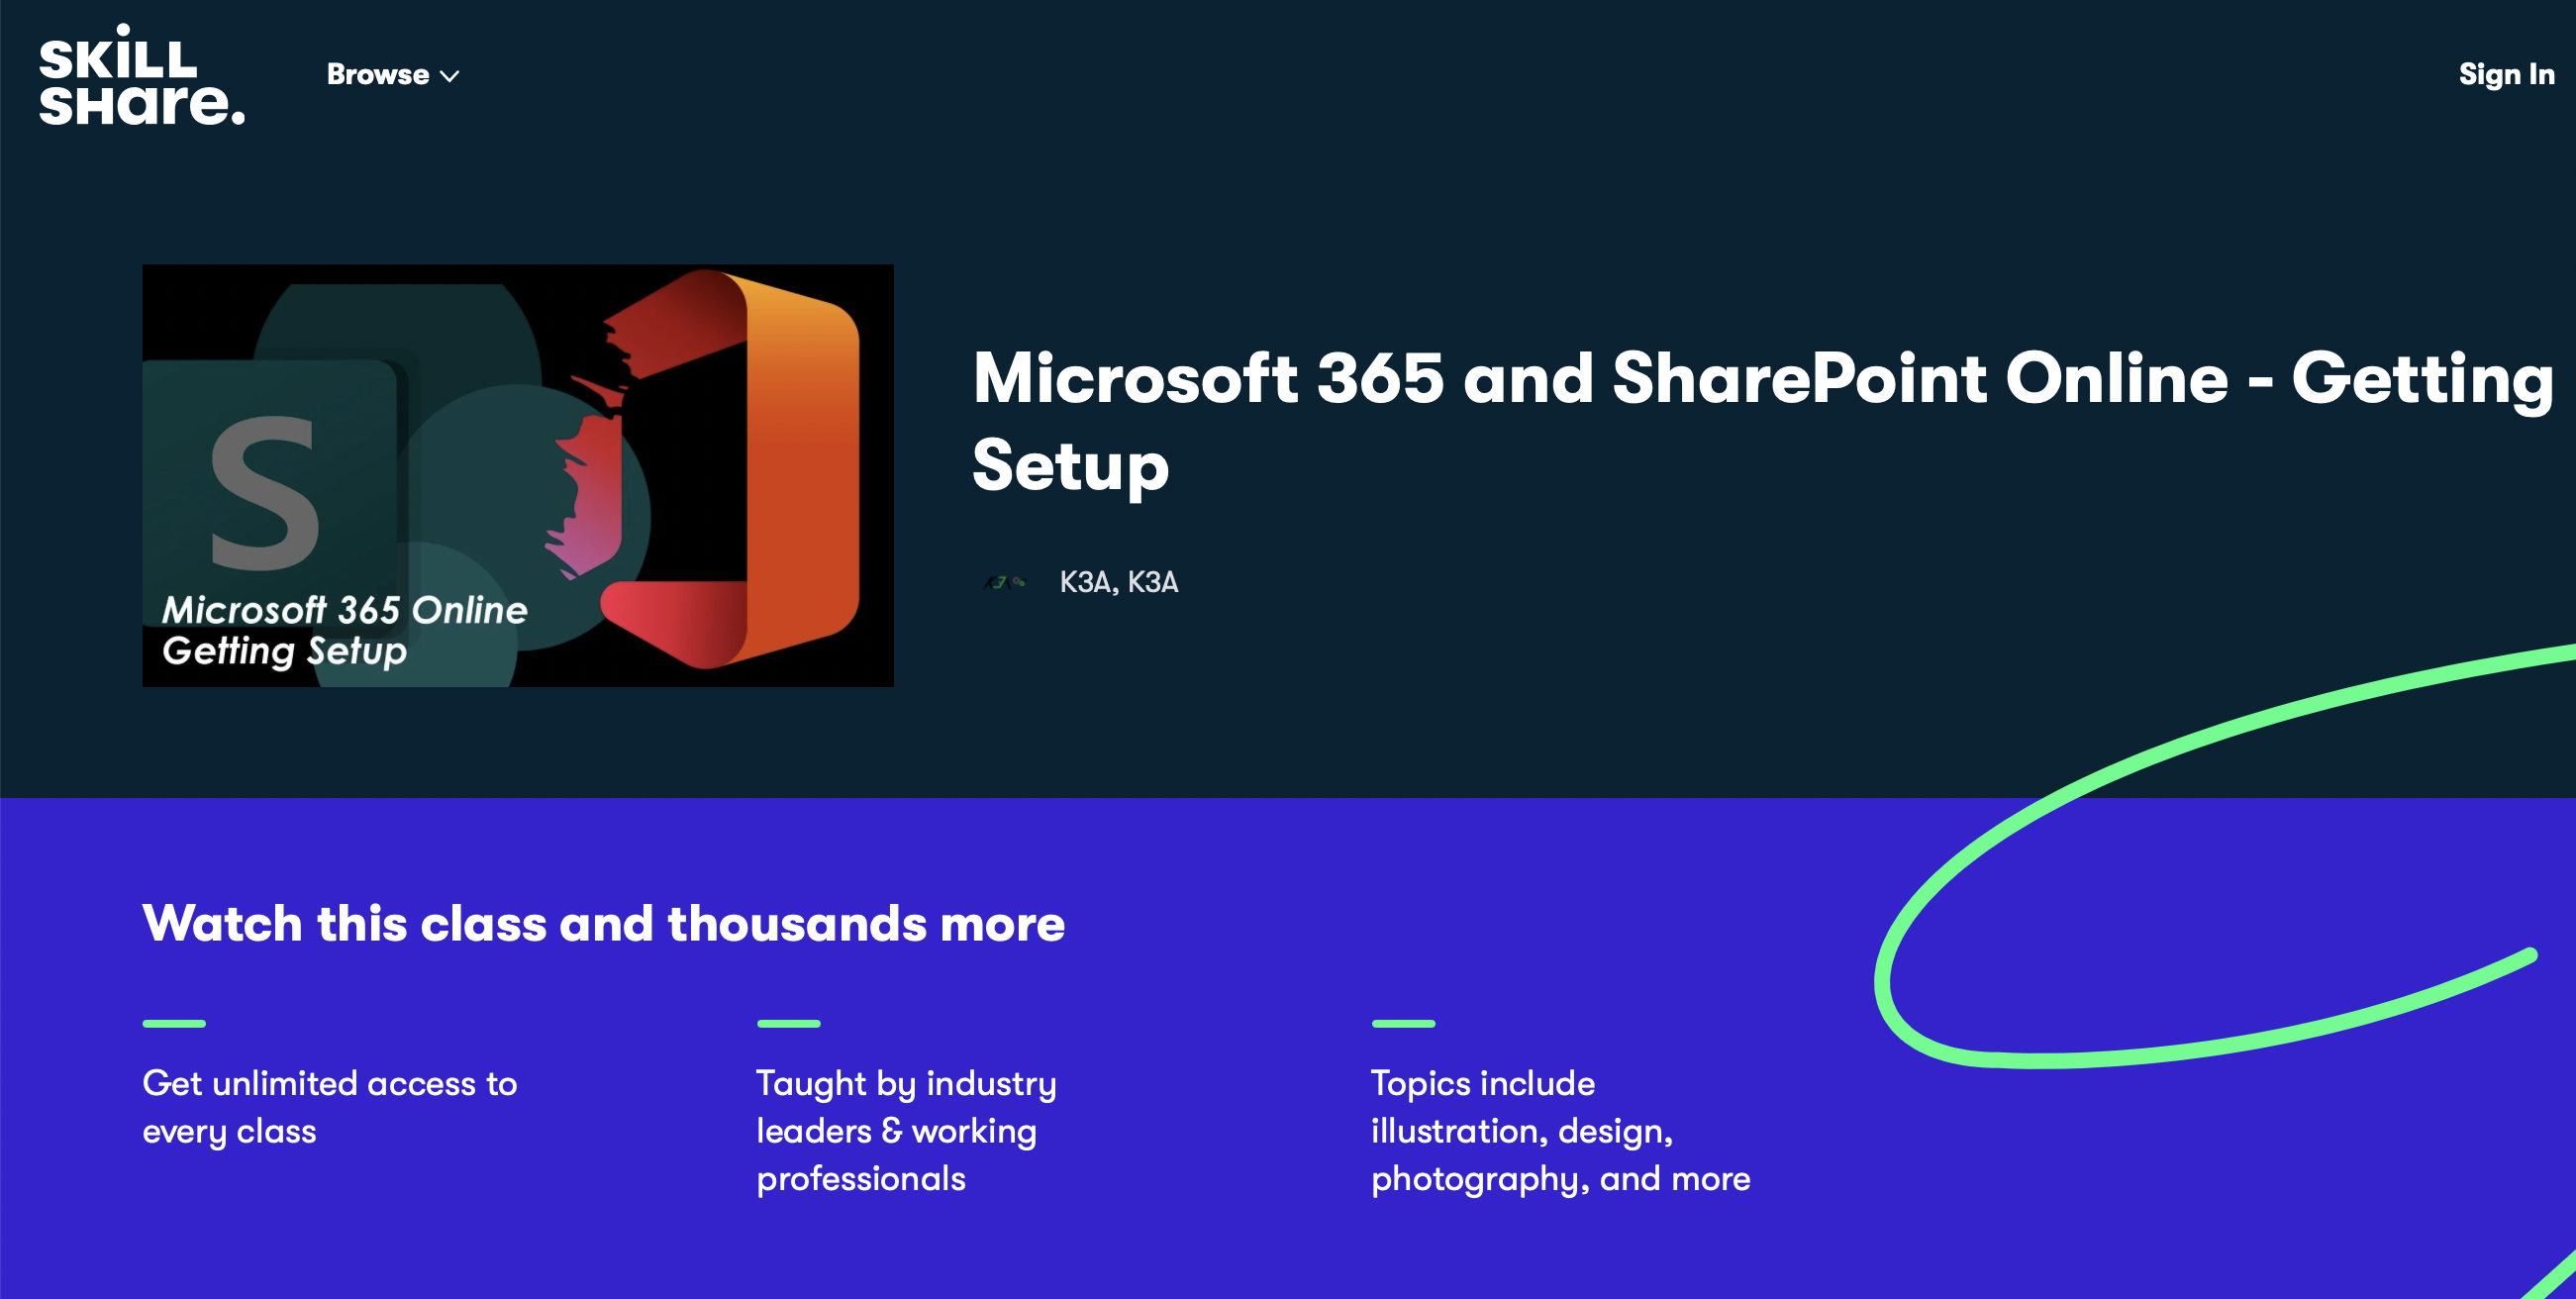 Microsoft 365 and SharePoint Online - Getting Setup